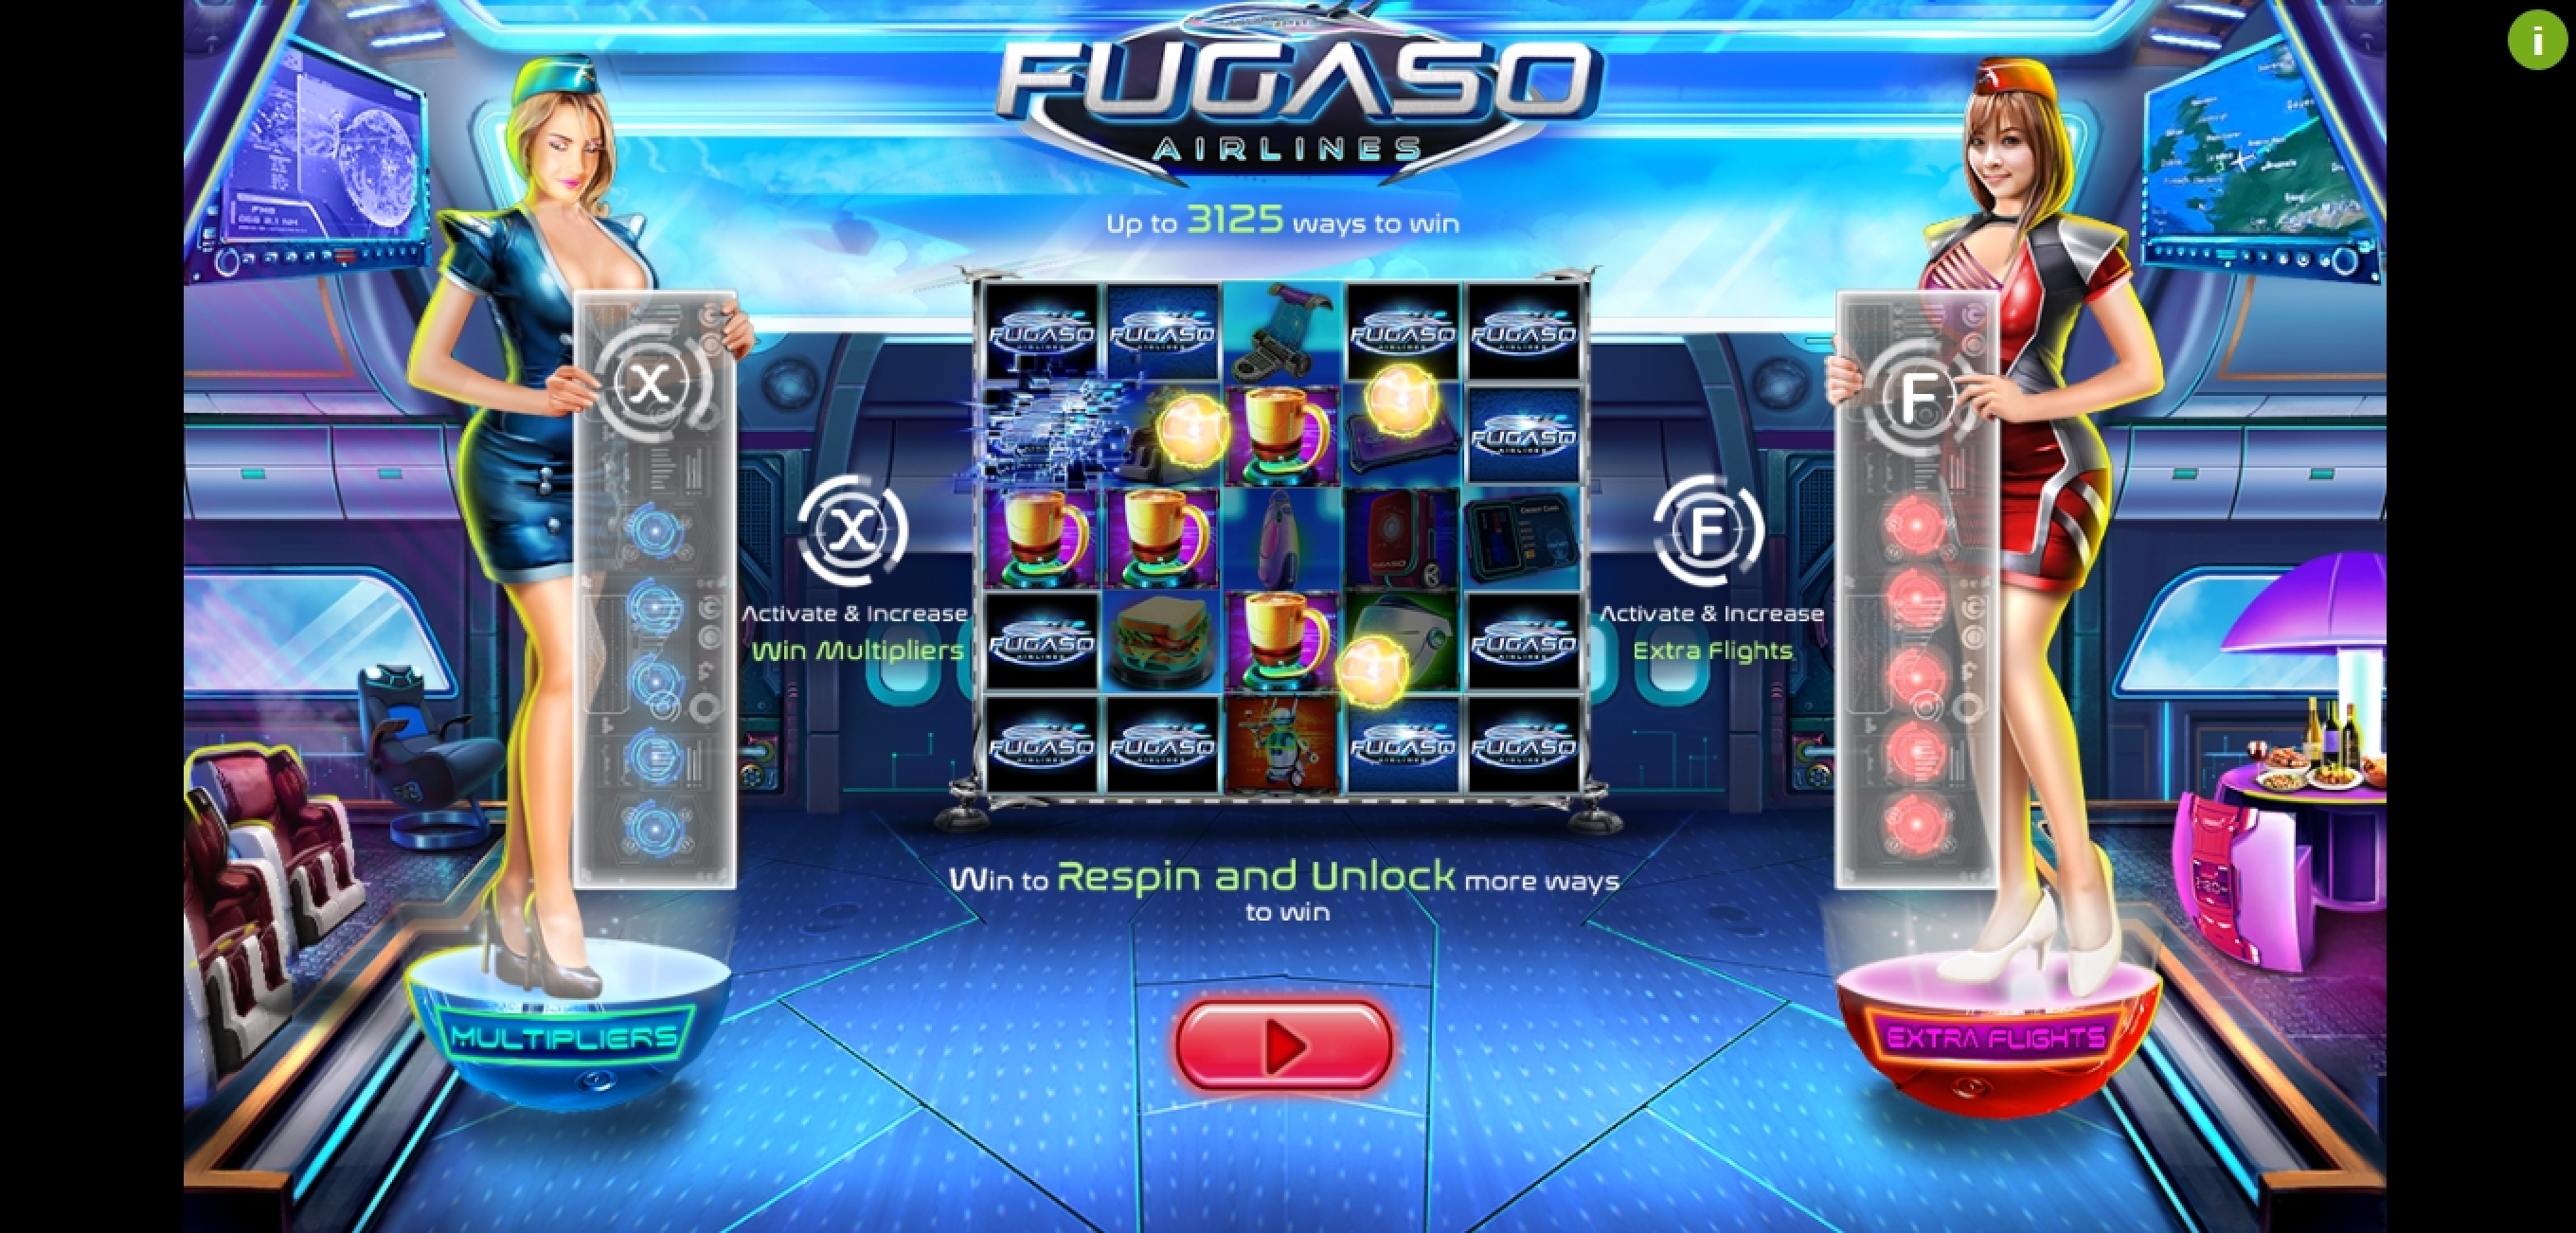 Play Fugaso Airlines Free Casino Slot Game by Fugaso